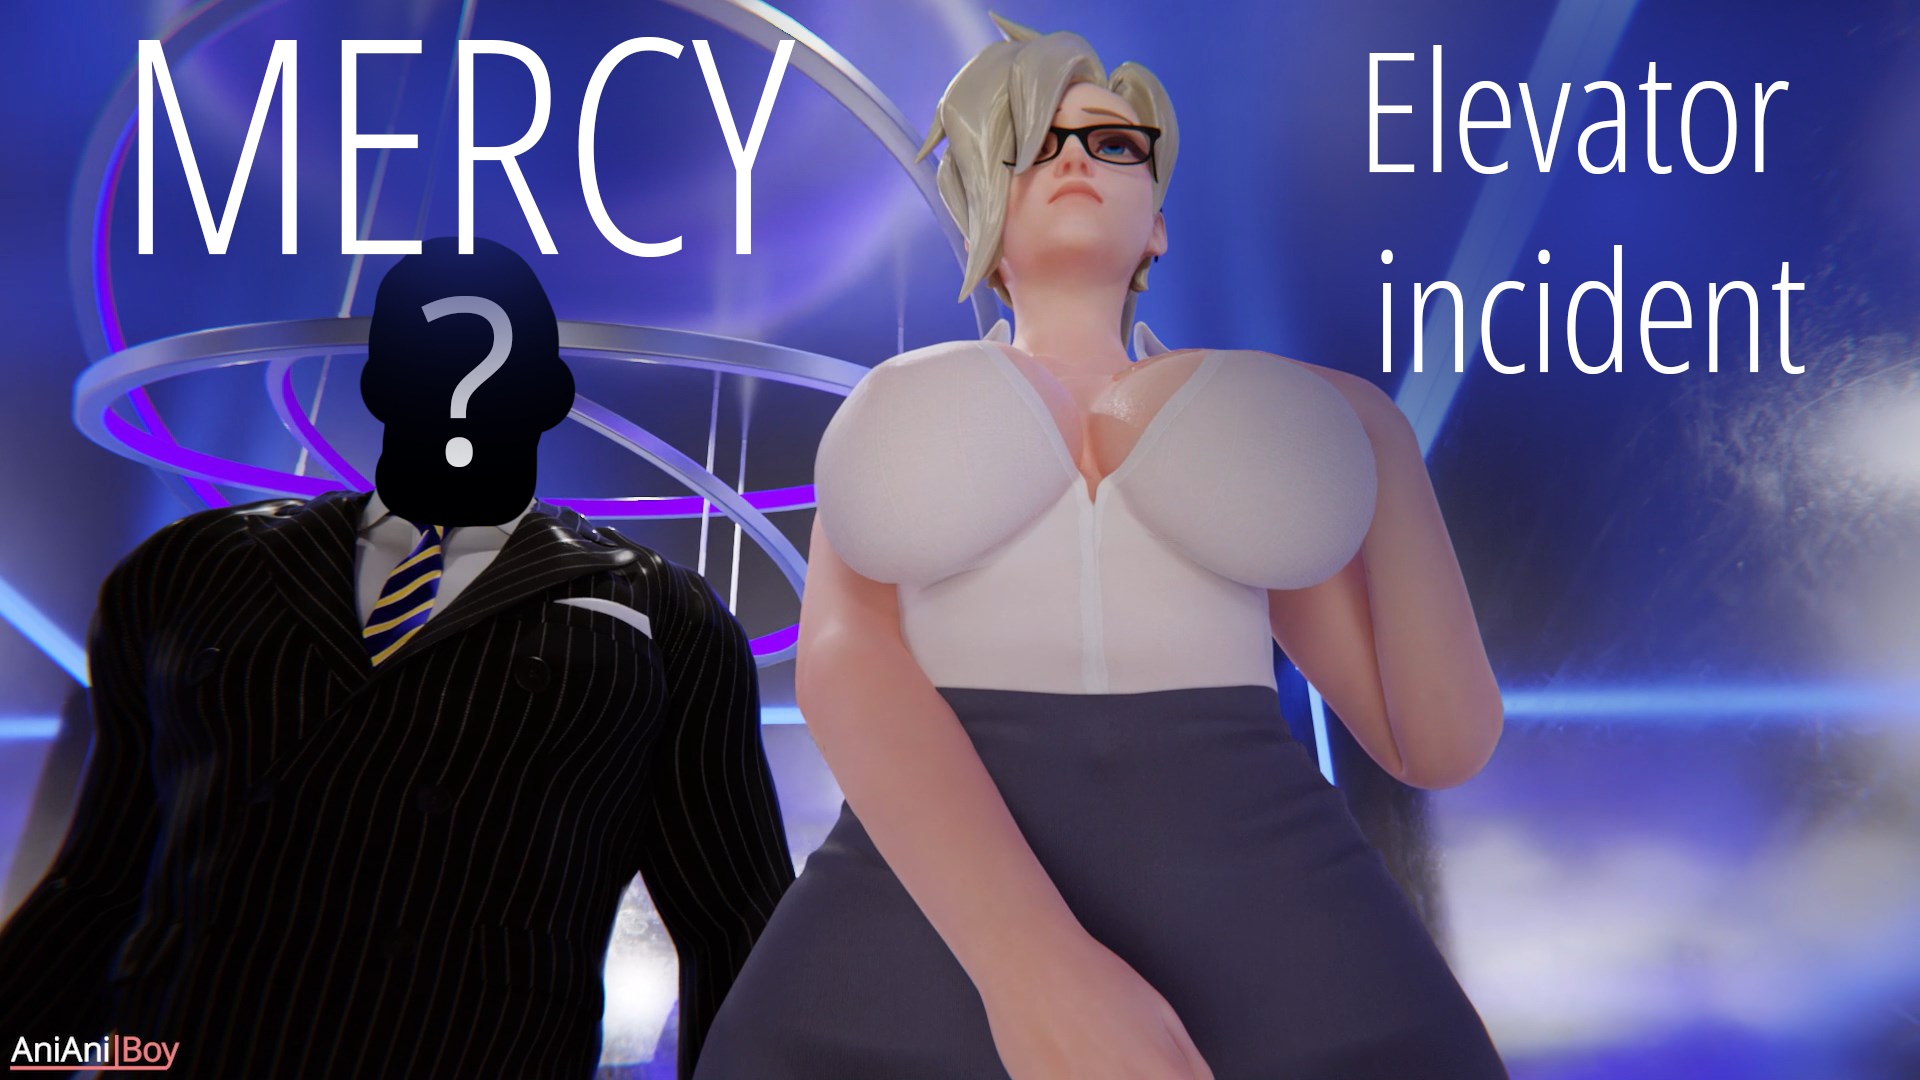 DOWNLOAD - Mercy: elevator incident (Patreon) by AniAniBoy.